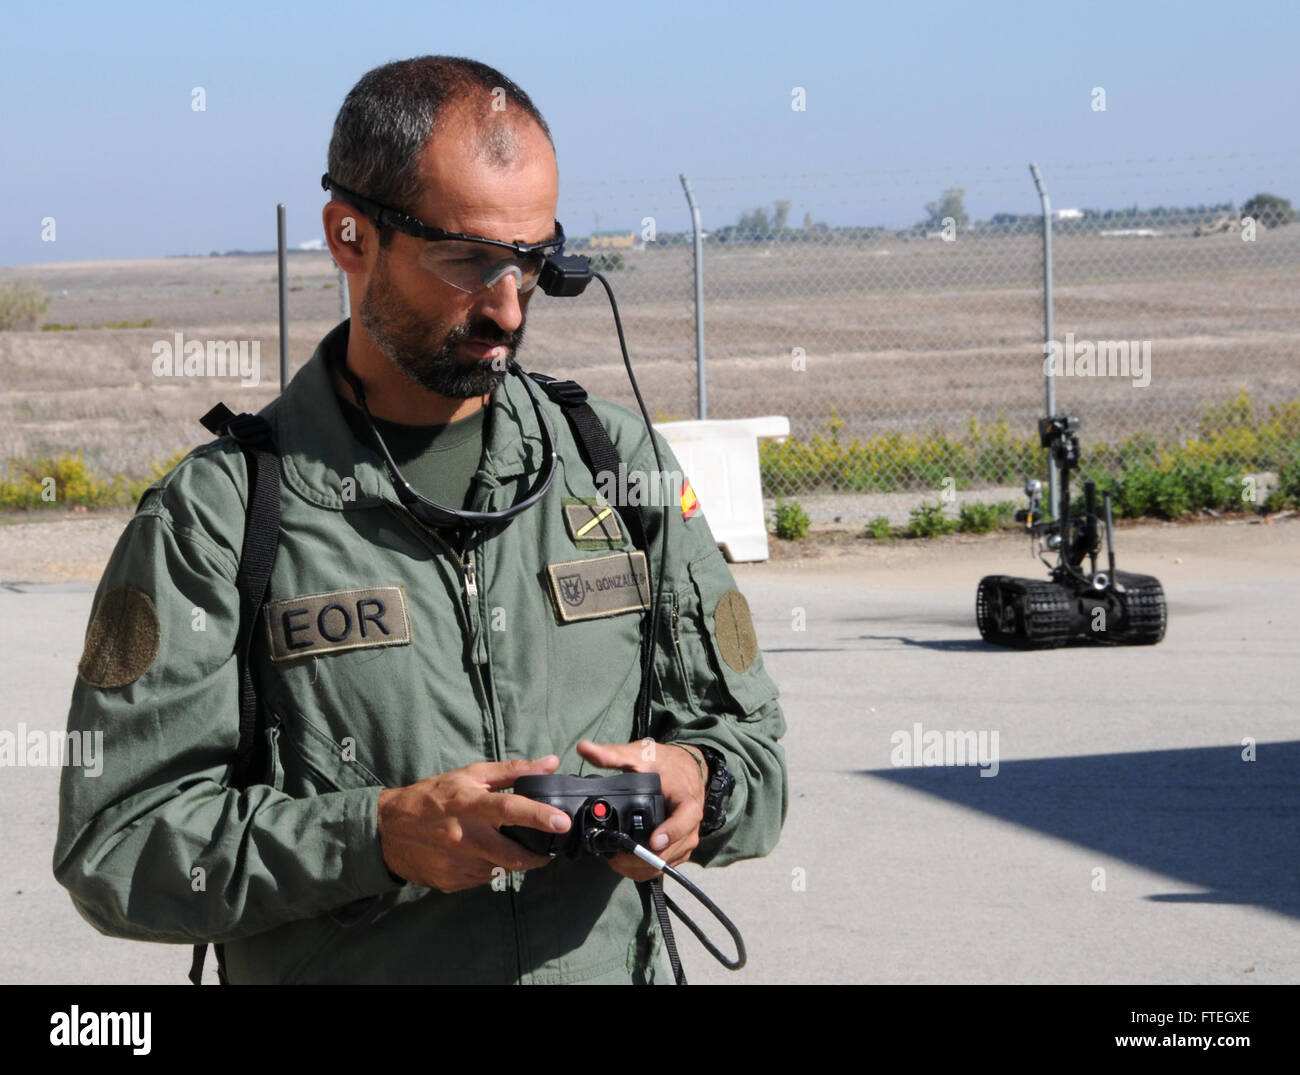 NAVAL STATION ROTA, Spain (Oct. 7, 2014) – Spanish Marine Cabo Mayor Antonio Gonzalez Ruiz operates a small unmanned ground vehicle (SUGV) robot as part of the 2014 Cadizex Exercise at the simulated urban terrain compound Hogan's Alley aboard Naval Station Rota.  Spanish Marines Brimar from San Fernando, Spain, U.S. Navy Sailors, and Italian navy 1st Regiment San Marco from Venice, Italy worked in tandem during the trilateral exercise meant to strengthen bonds between NATO allies and provide strategic training. Stock Photo